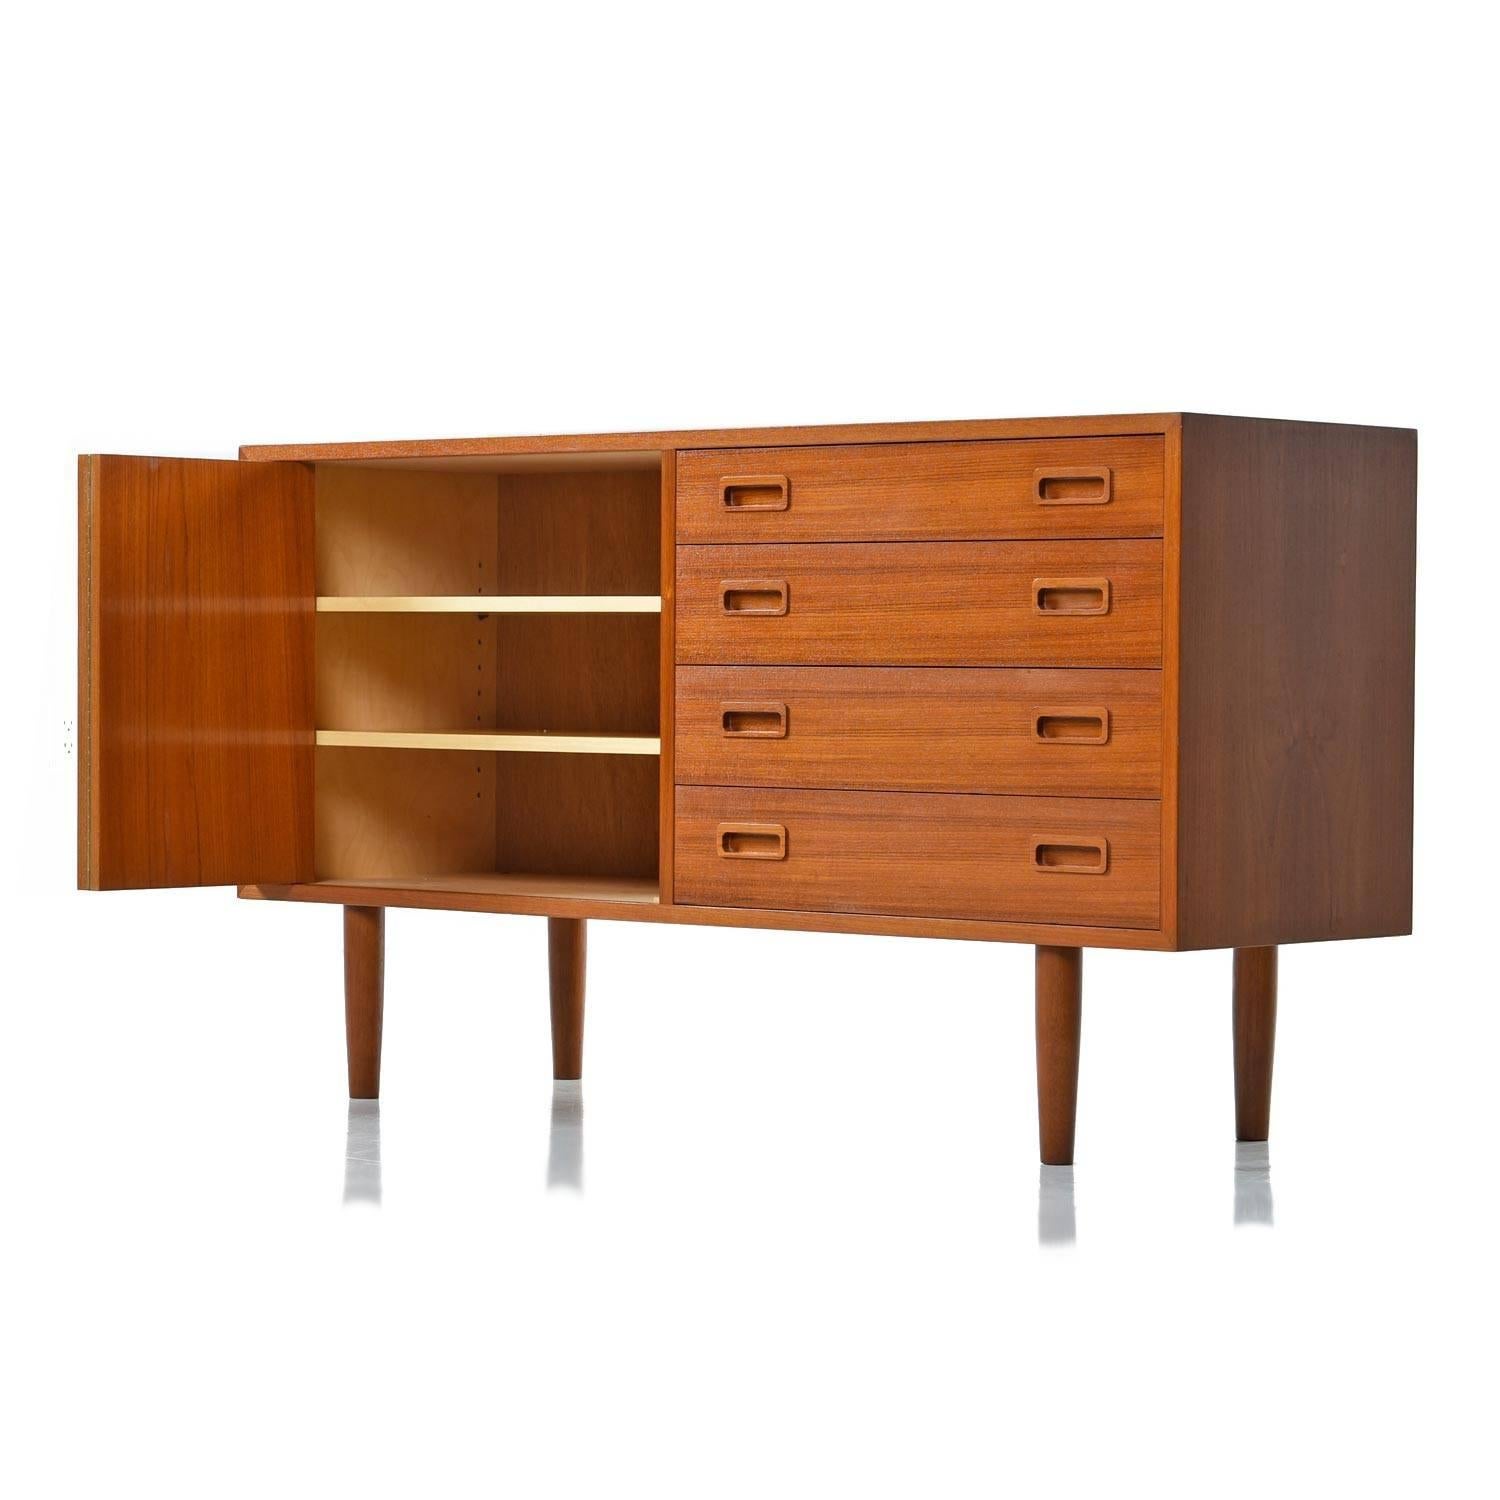 Mid-Century Modern teak credenza by Poul Hundevad. Credenza bears the makers mark on the back left corner and is stamped 